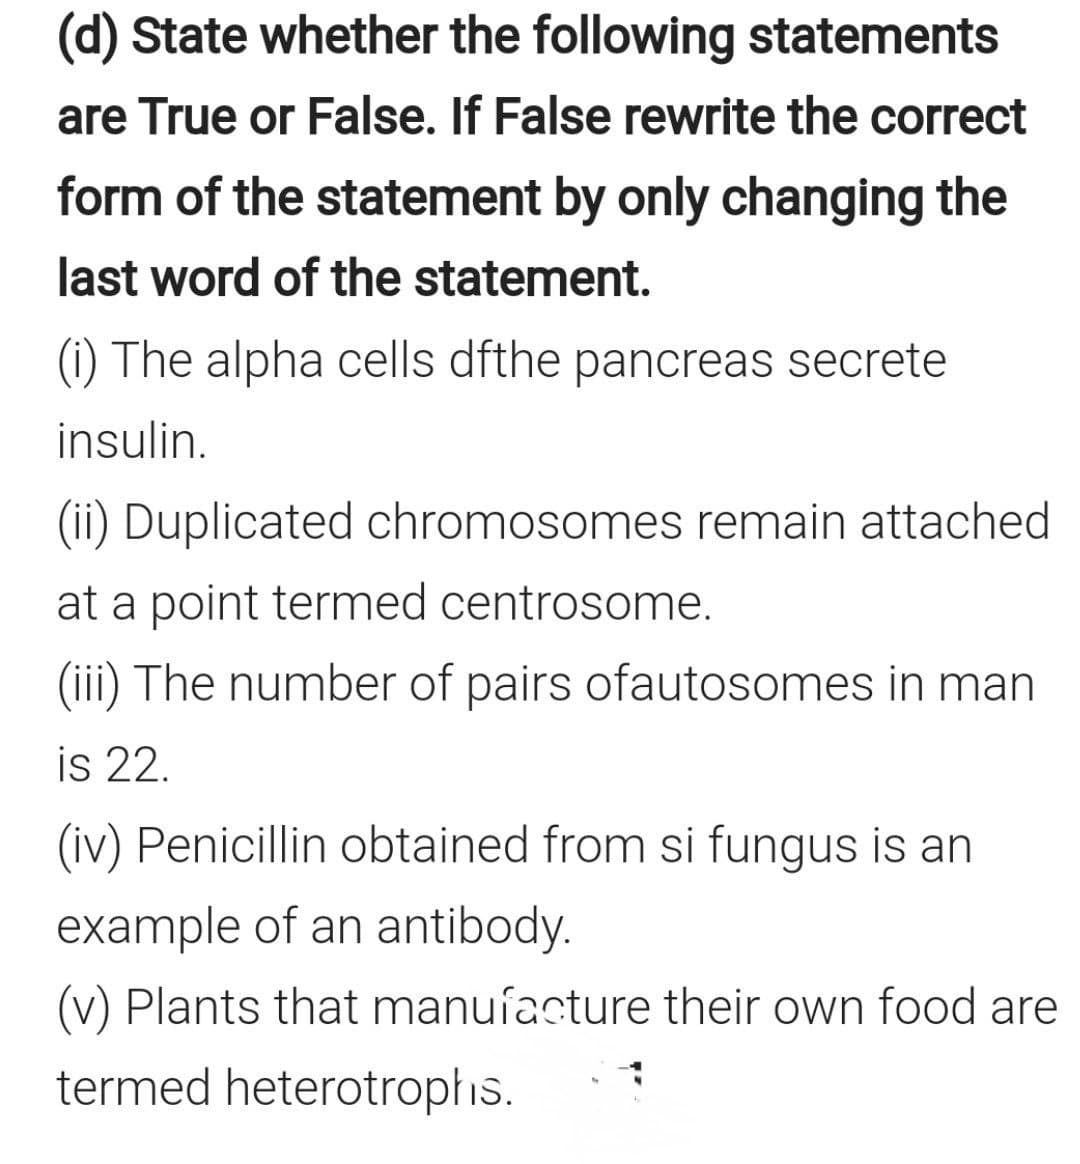 (d) State whether the following statements
are True or False. If False rewrite the correct
form of the statement by only changing the
last word of the statement.
(i) The alpha cells dfthe pancreas secrete
insulin.
(ii) Duplicated chromosomes remain attached
at a point termed centrosome.
(iii) The number of pairs ofautosomes in man
is 22.
(iv) Penicillin obtained from si fungus is an
example of an antibody.
(v) Plants that manuíacture their own food are
termed heterotropłis.
